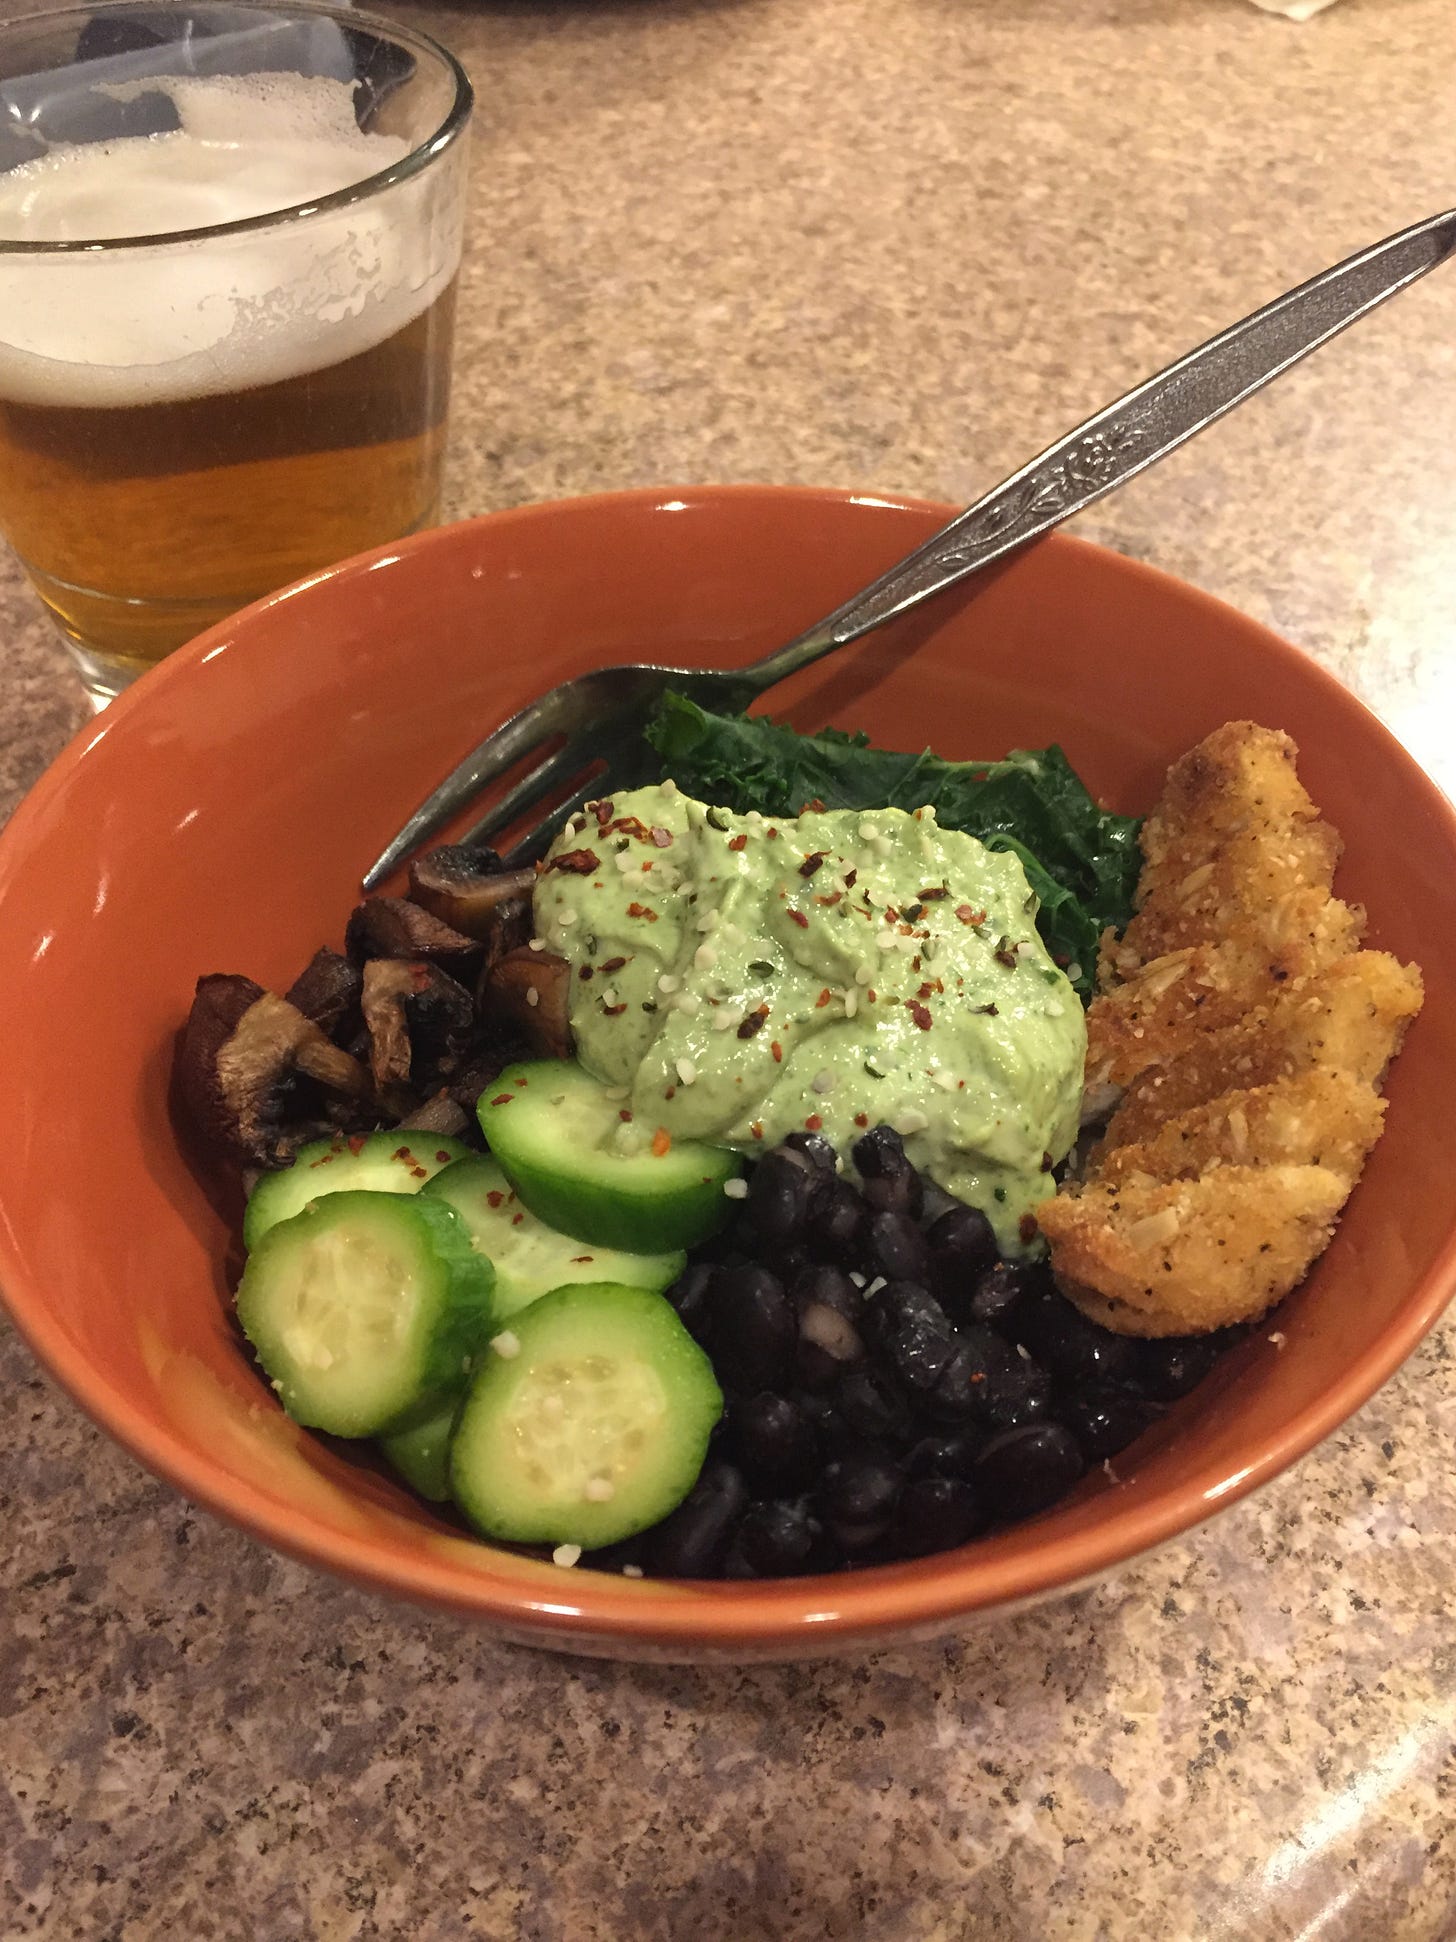 In an orange bowl, small piles of black beans, cucumber, roast mushrooms, kale, and a chopped chick'n tender sit on top of of brown rice. A blob of green goddess dressing is in the centre, with hemp seeds and chili flakes flecked on top.